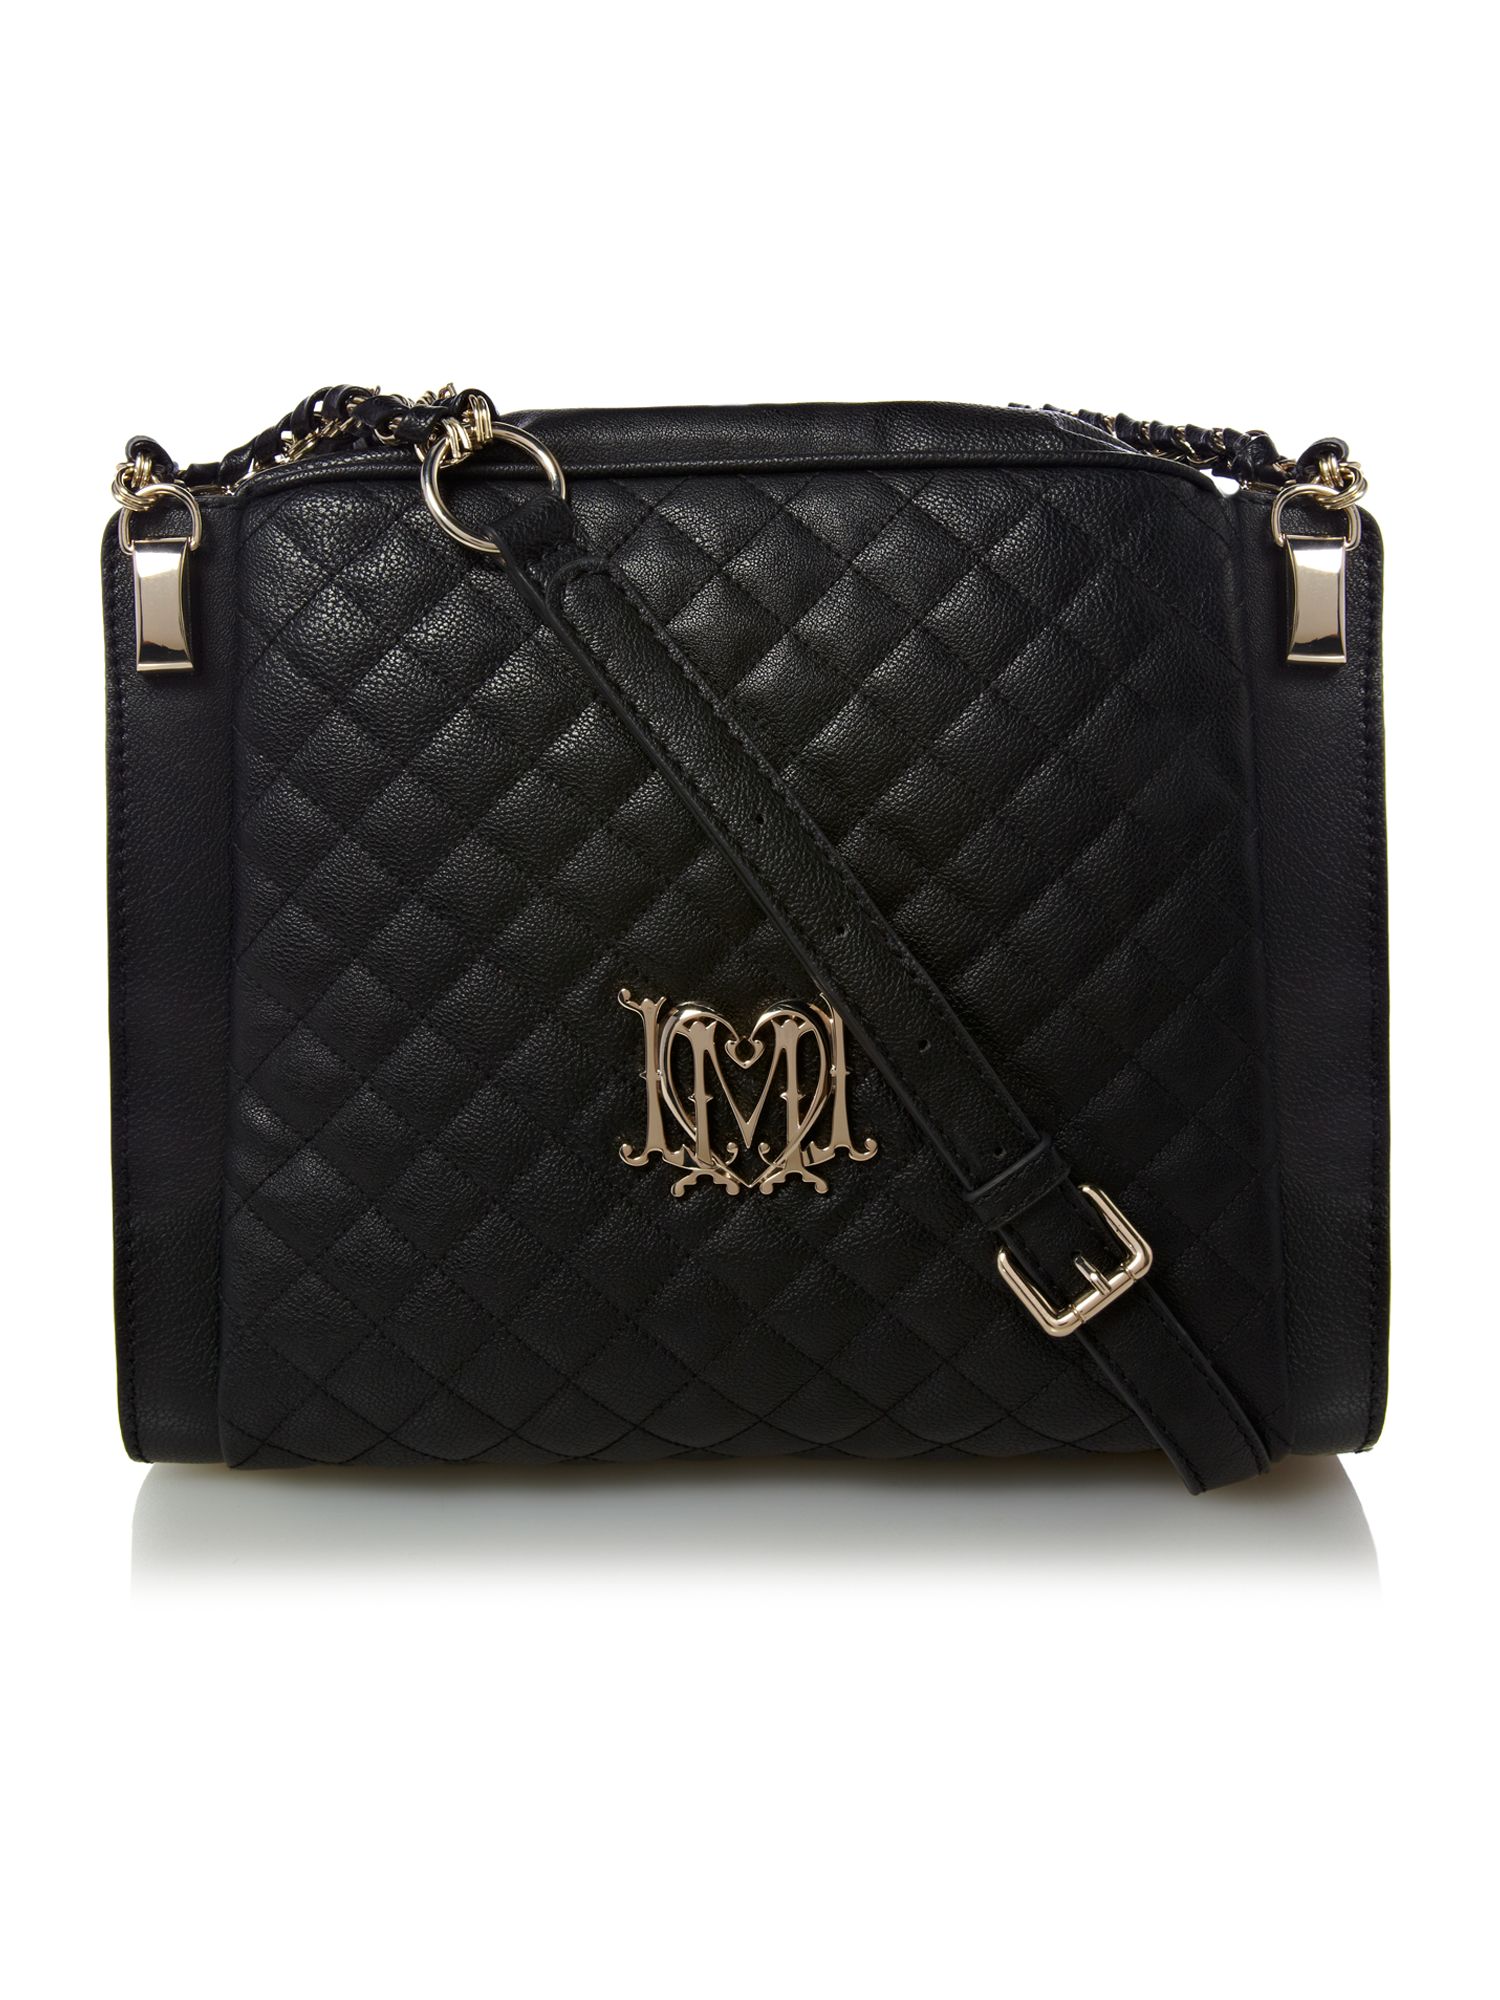 Love Moschino Modern Quilted Large Crossbody Bag in Black | Lyst